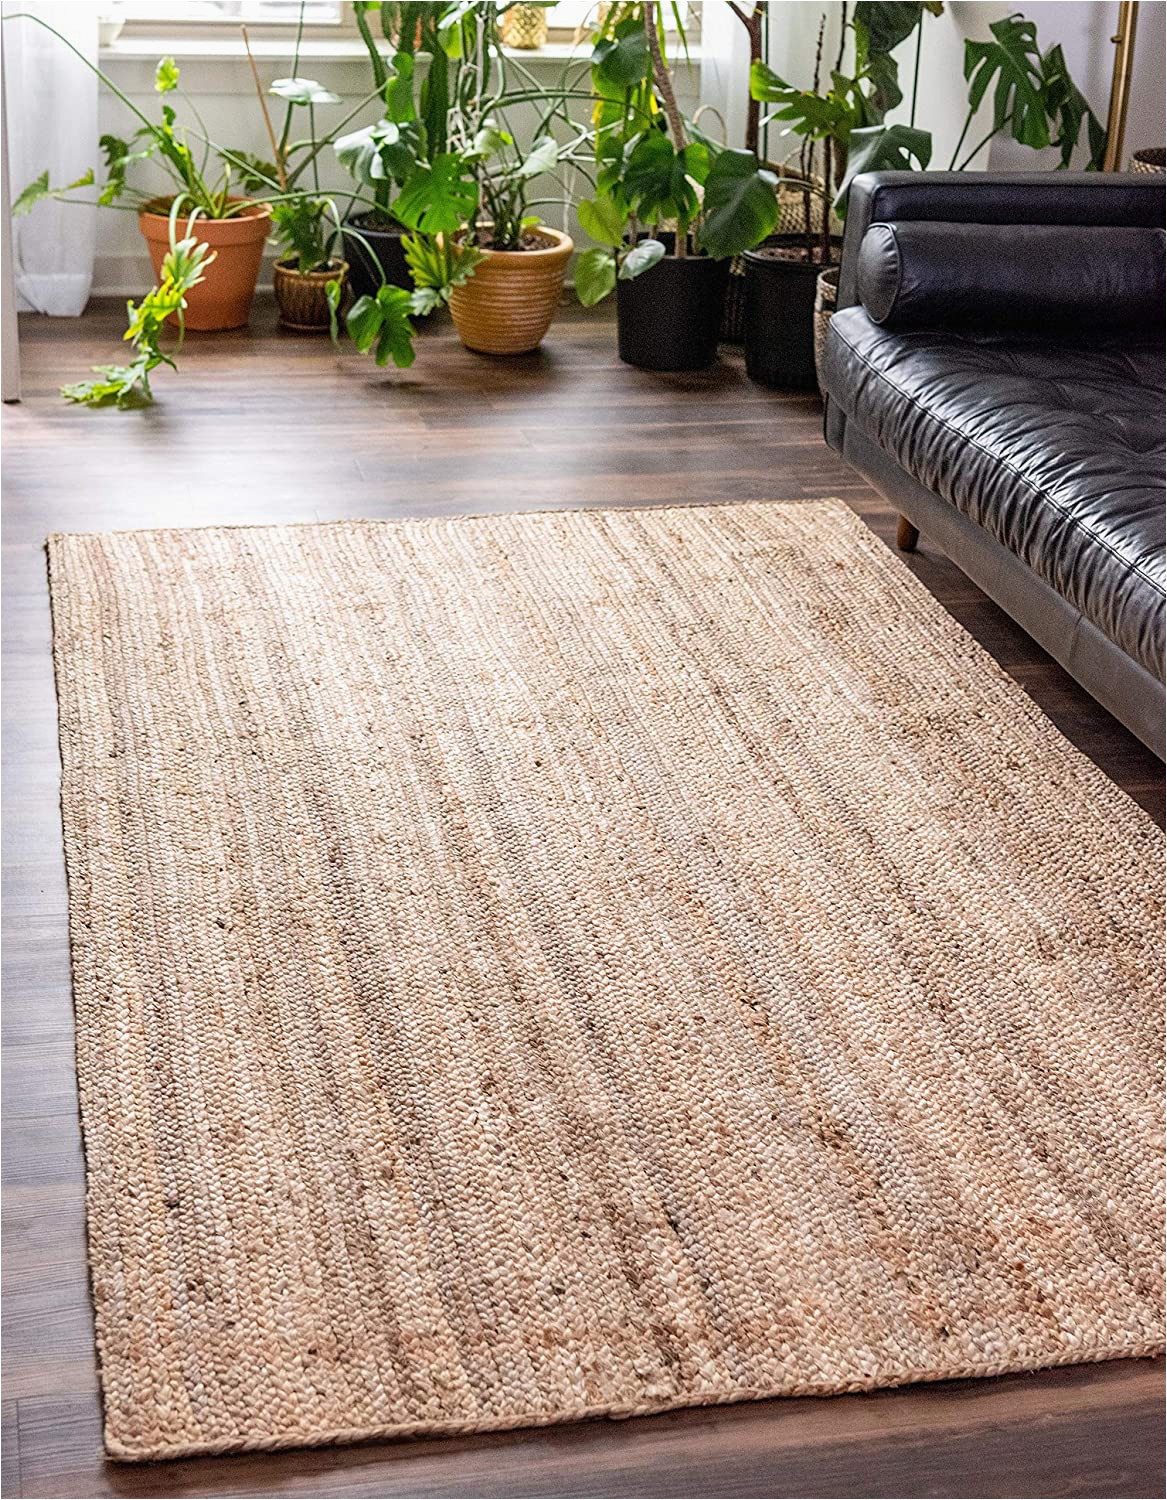 Iron Gate Handspun Jute area Rug Unique Loom Braided Jute Collection Hand Woven Natural Fibers Natural Beige area Rug 6 3 X 9 2